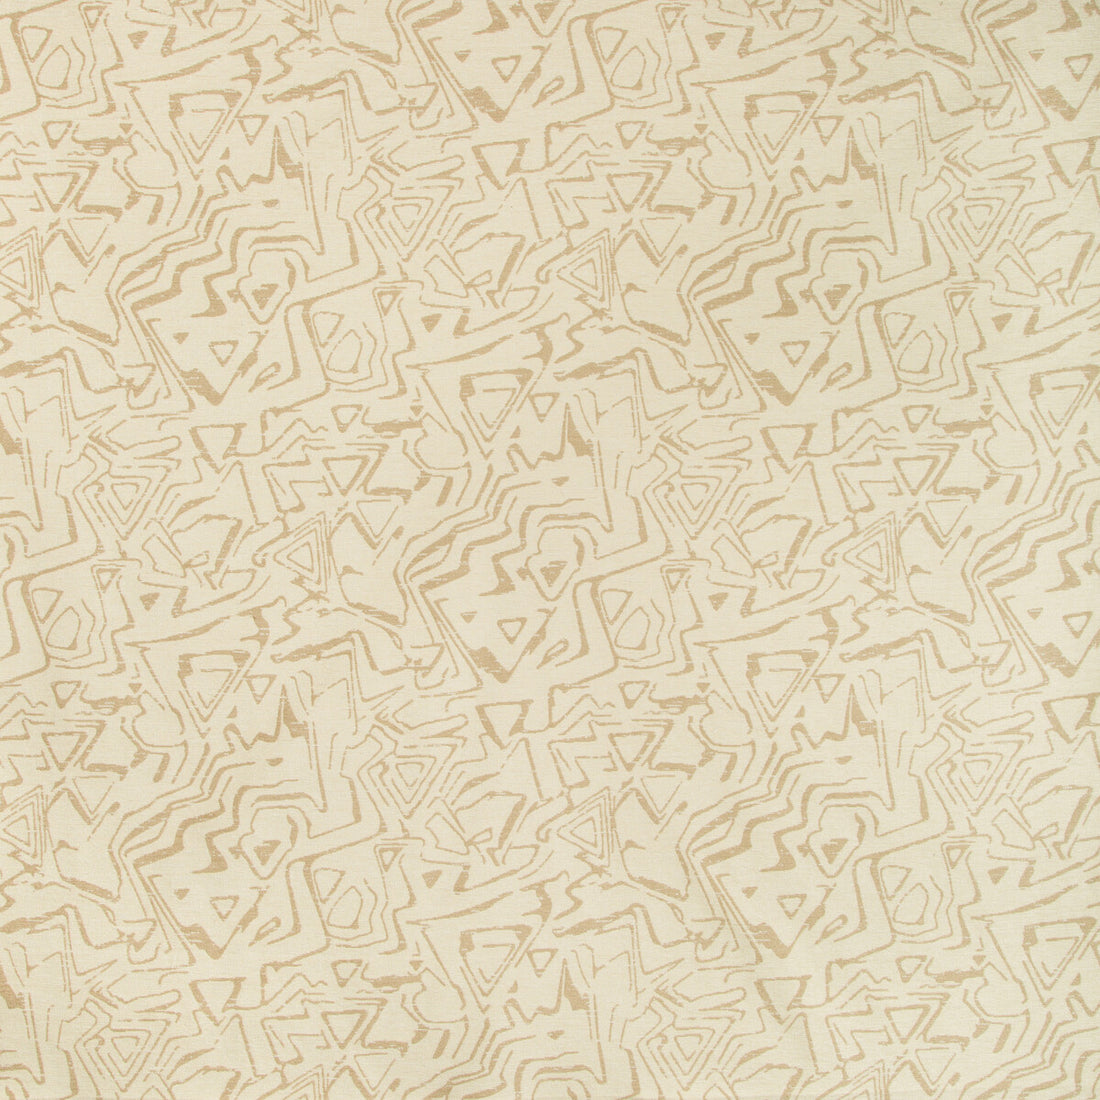 Kravet Design fabric in 34955-116 color - pattern 34955.116.0 - by Kravet Design in the Performance Crypton Home collection